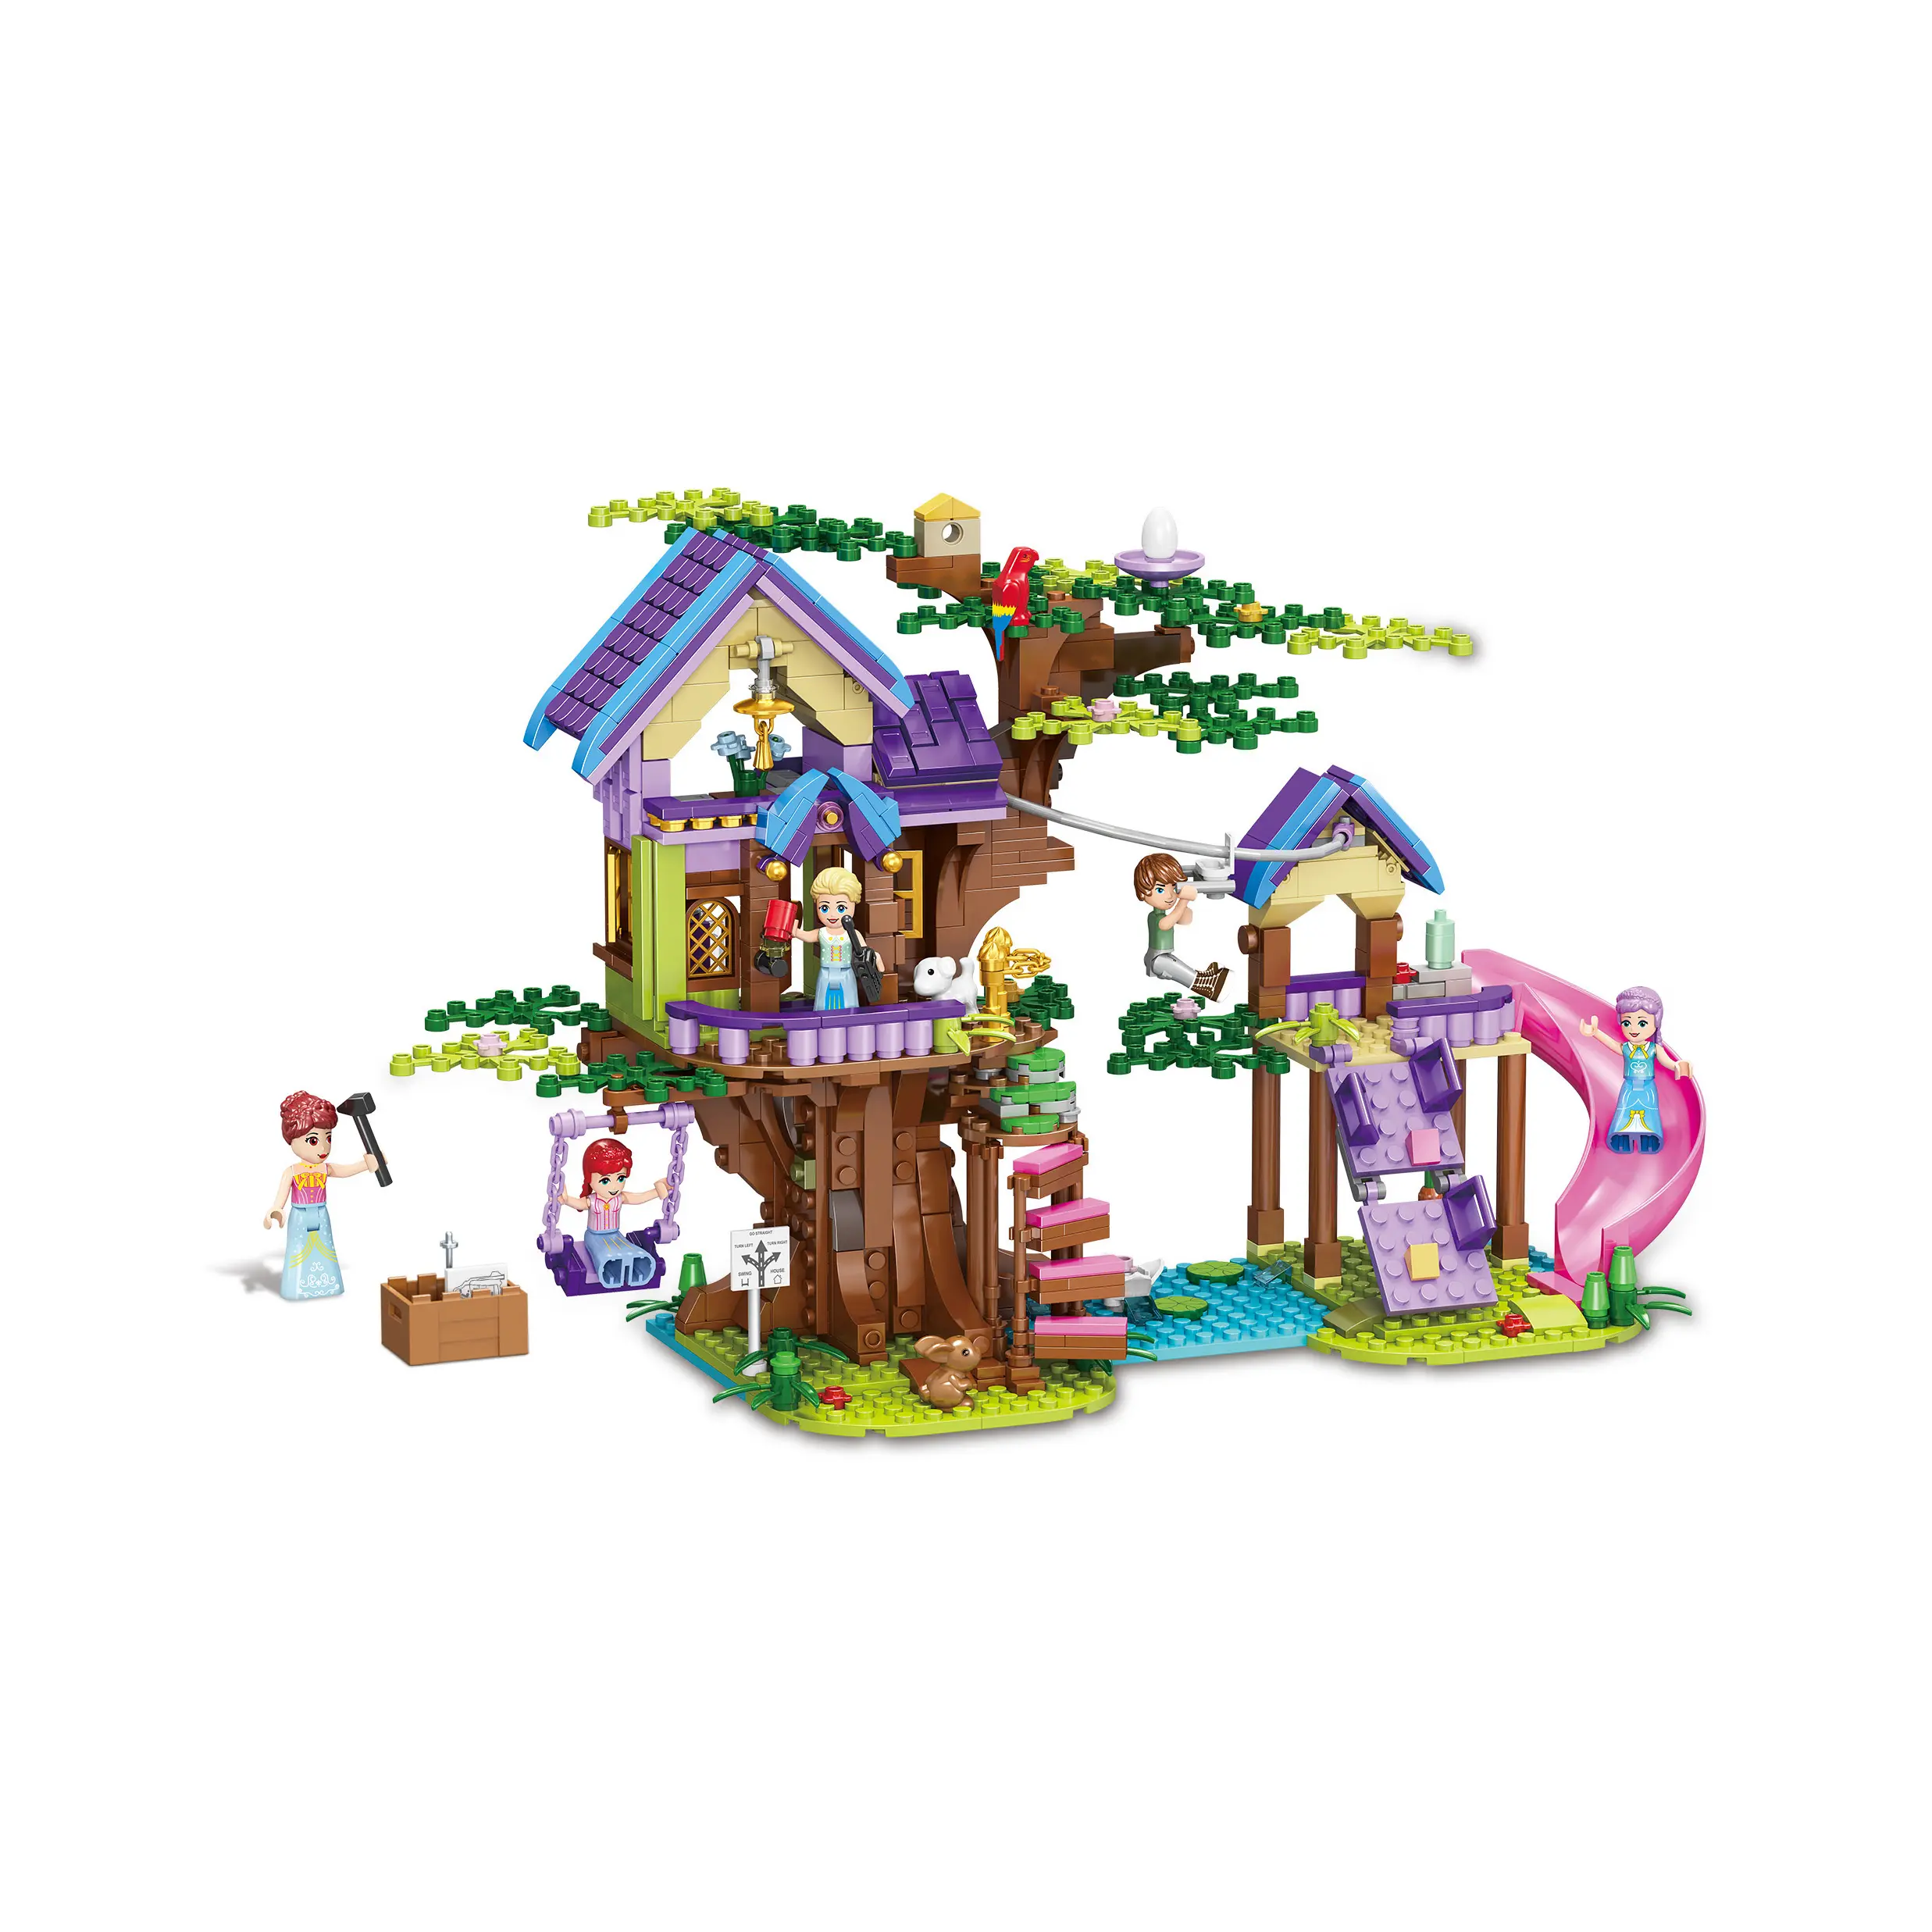 Tree House Building Toy Treehouse Building Block Set with Slides Swing Animals Friendship Forest House for Kids